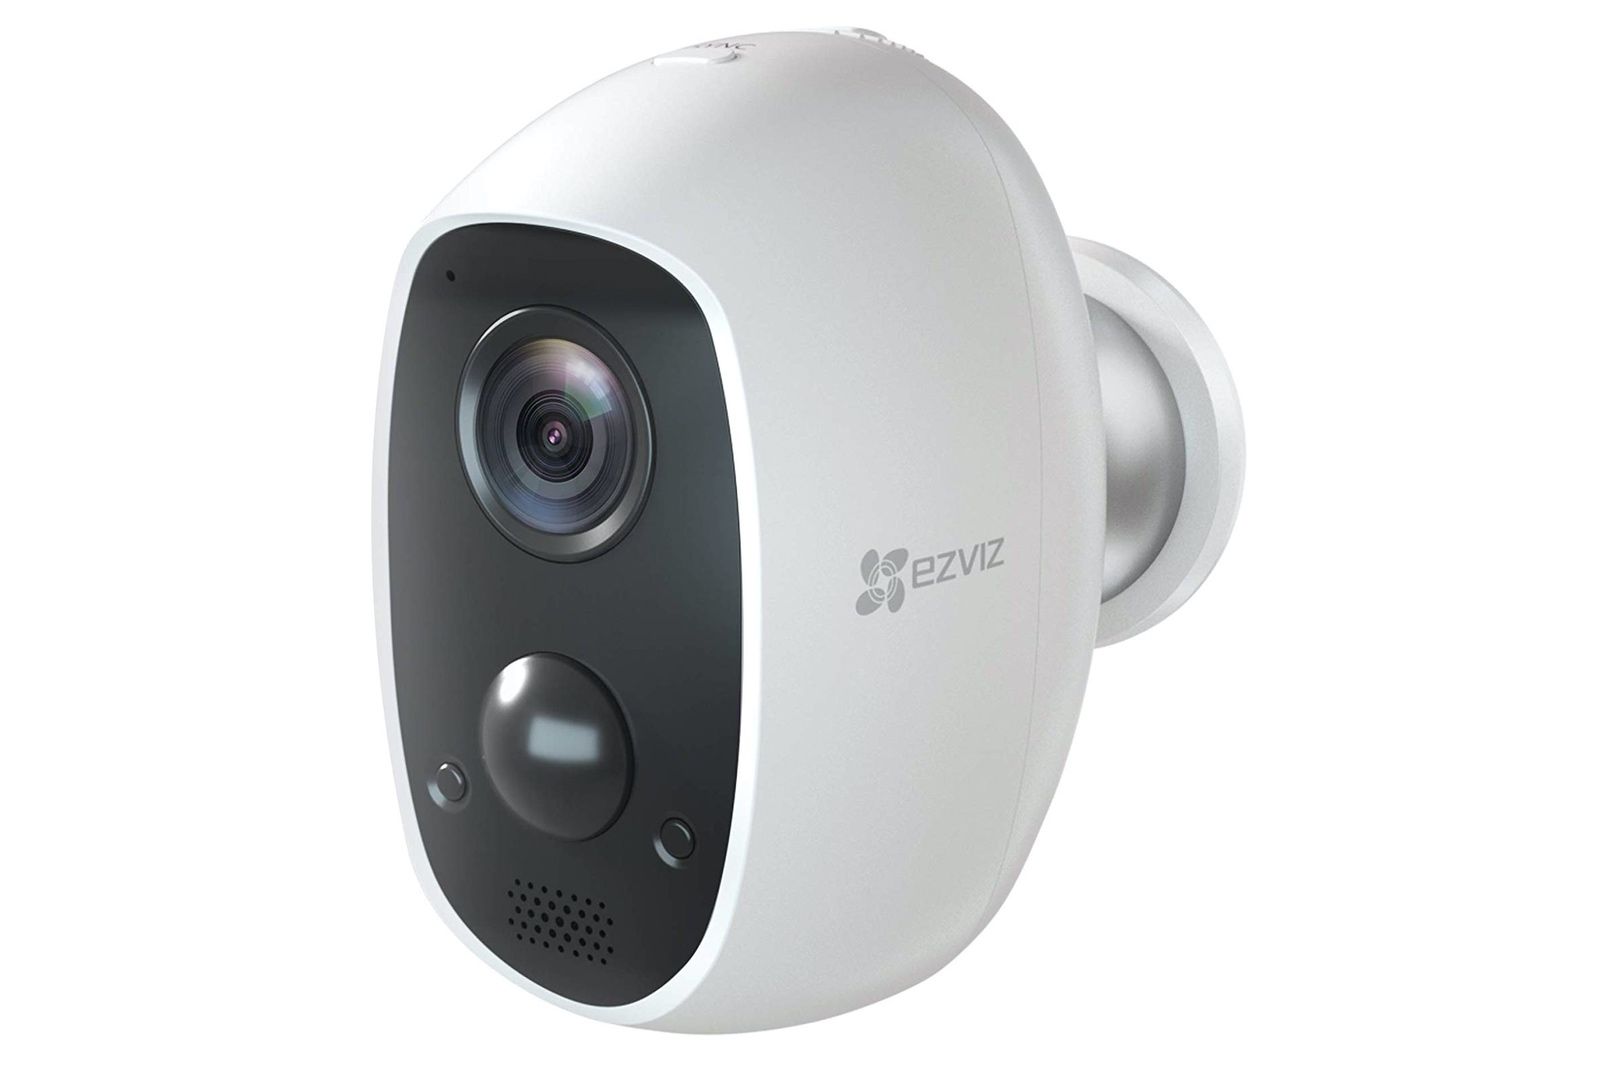 The Best Deals On Home Security Cameras From Ezviz image 5